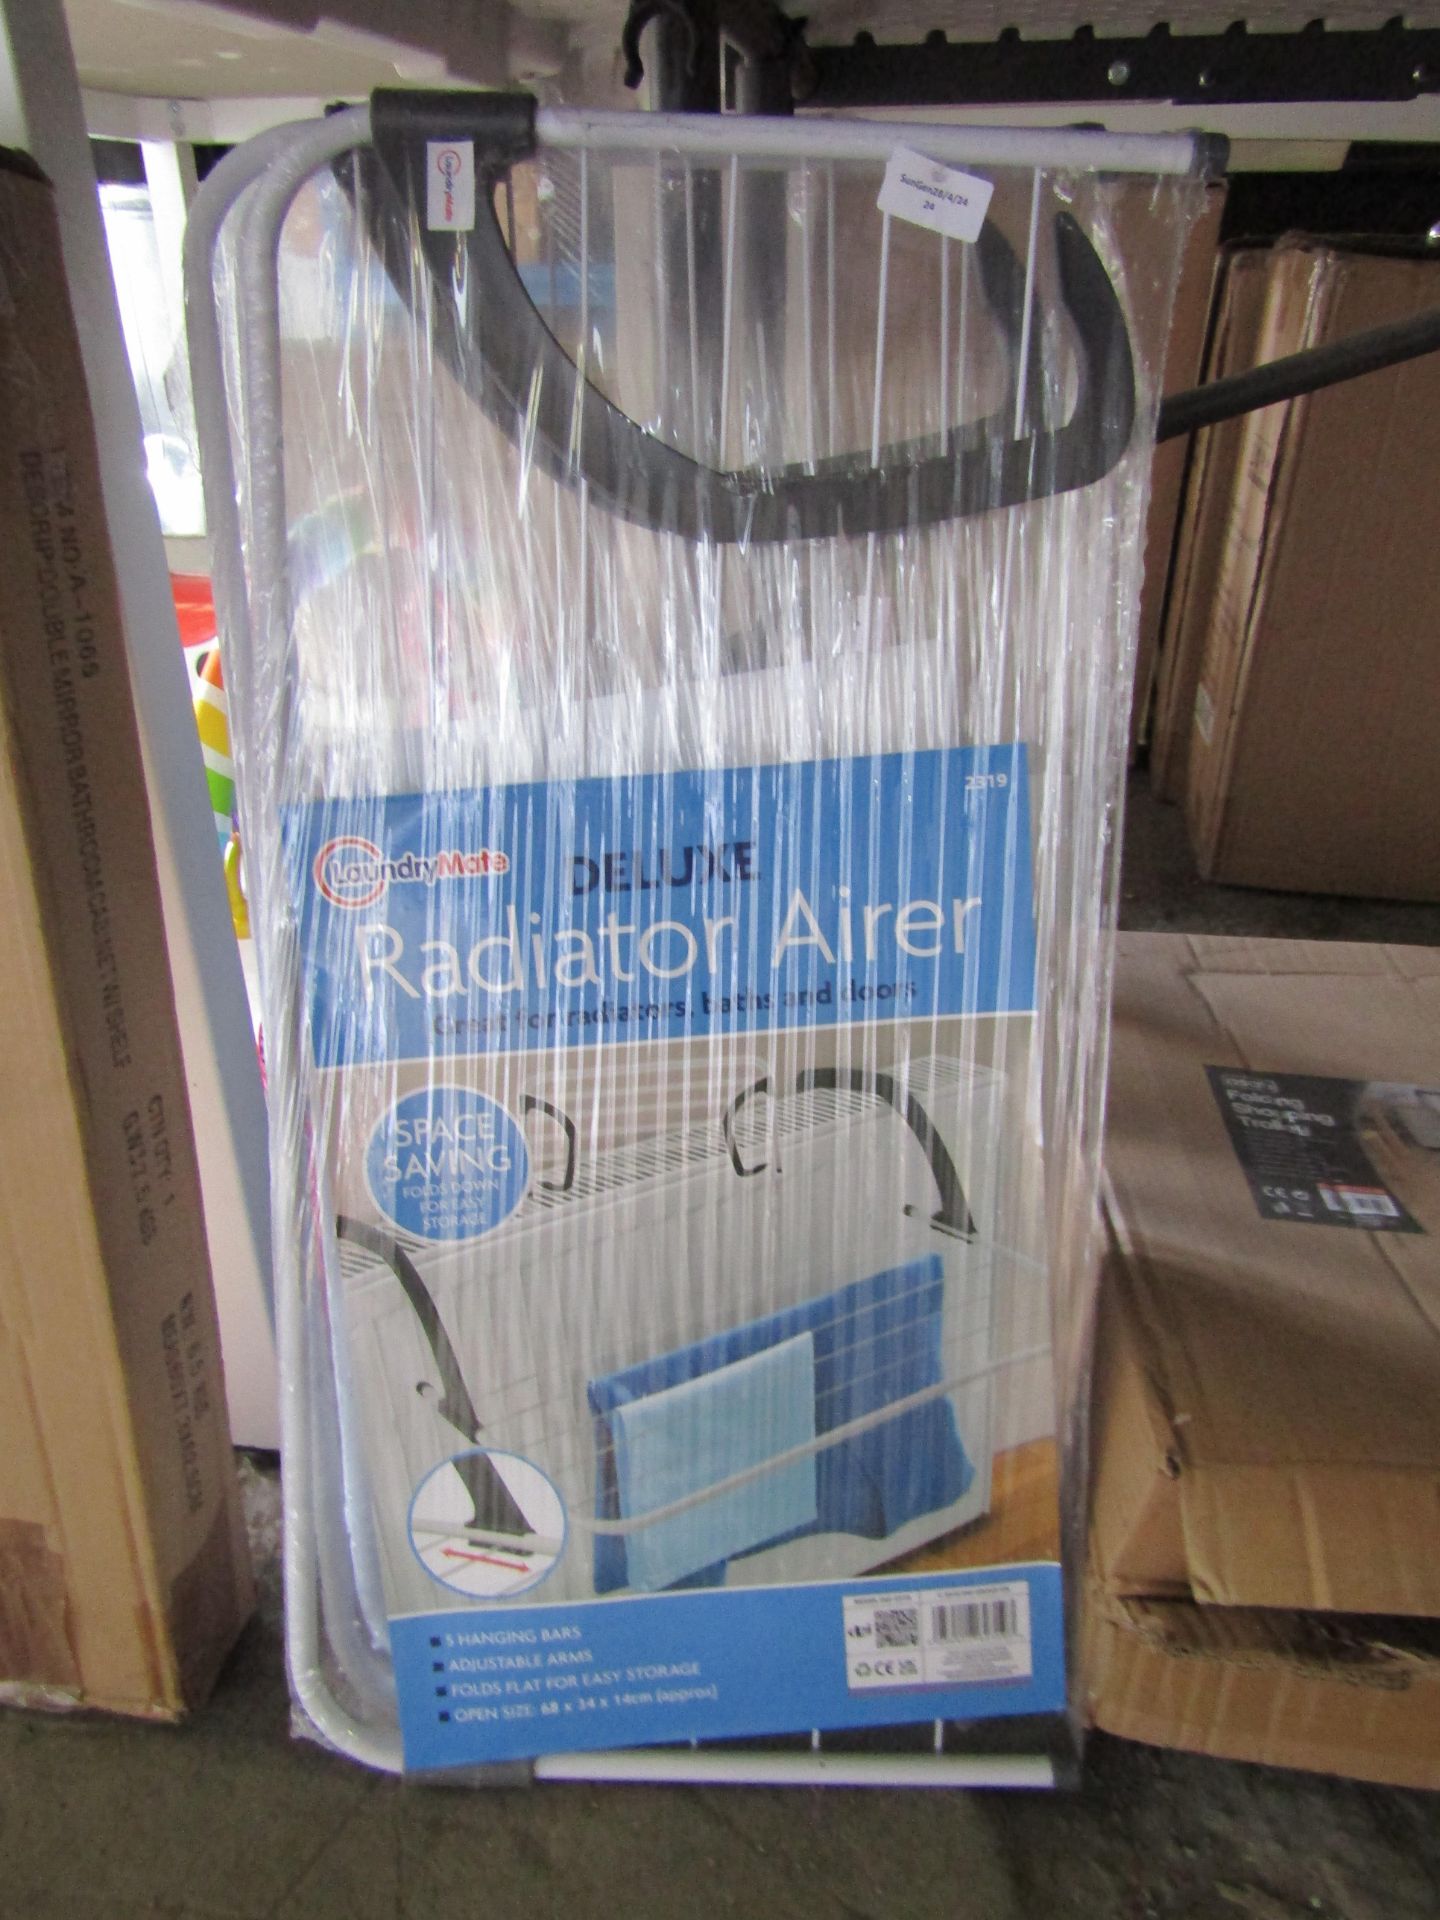 3x Laundry Mate Deluxe Radiator Airer, Size: 68 x 34 x 14cm - All Unchecked & Packaged.